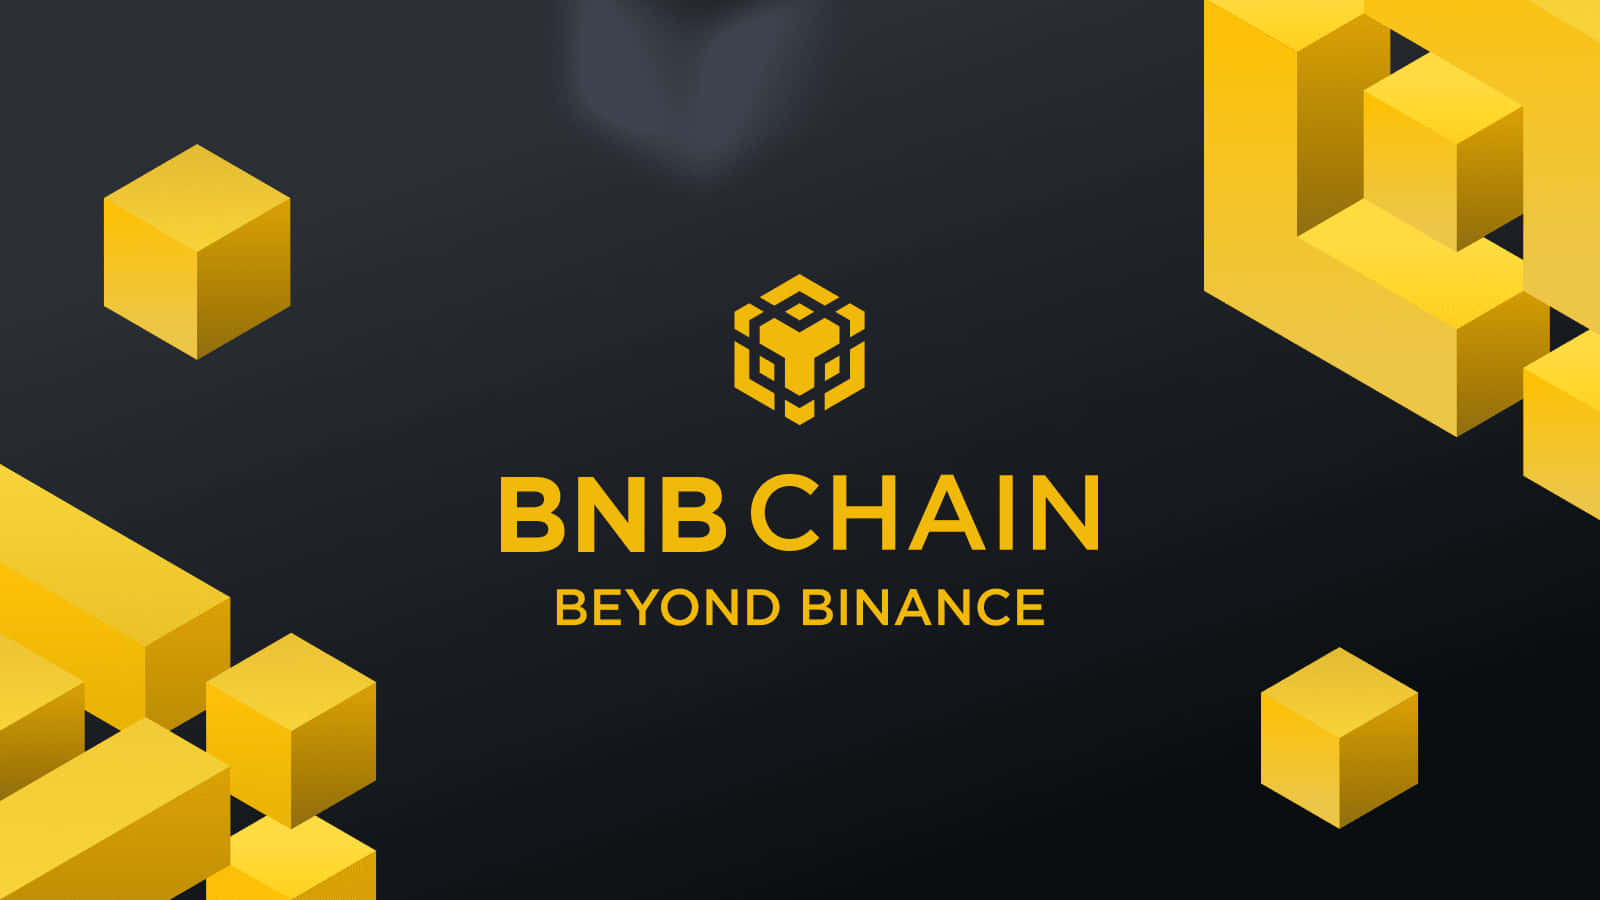 "Experience first-class cryptocurrency trading with Binance,"